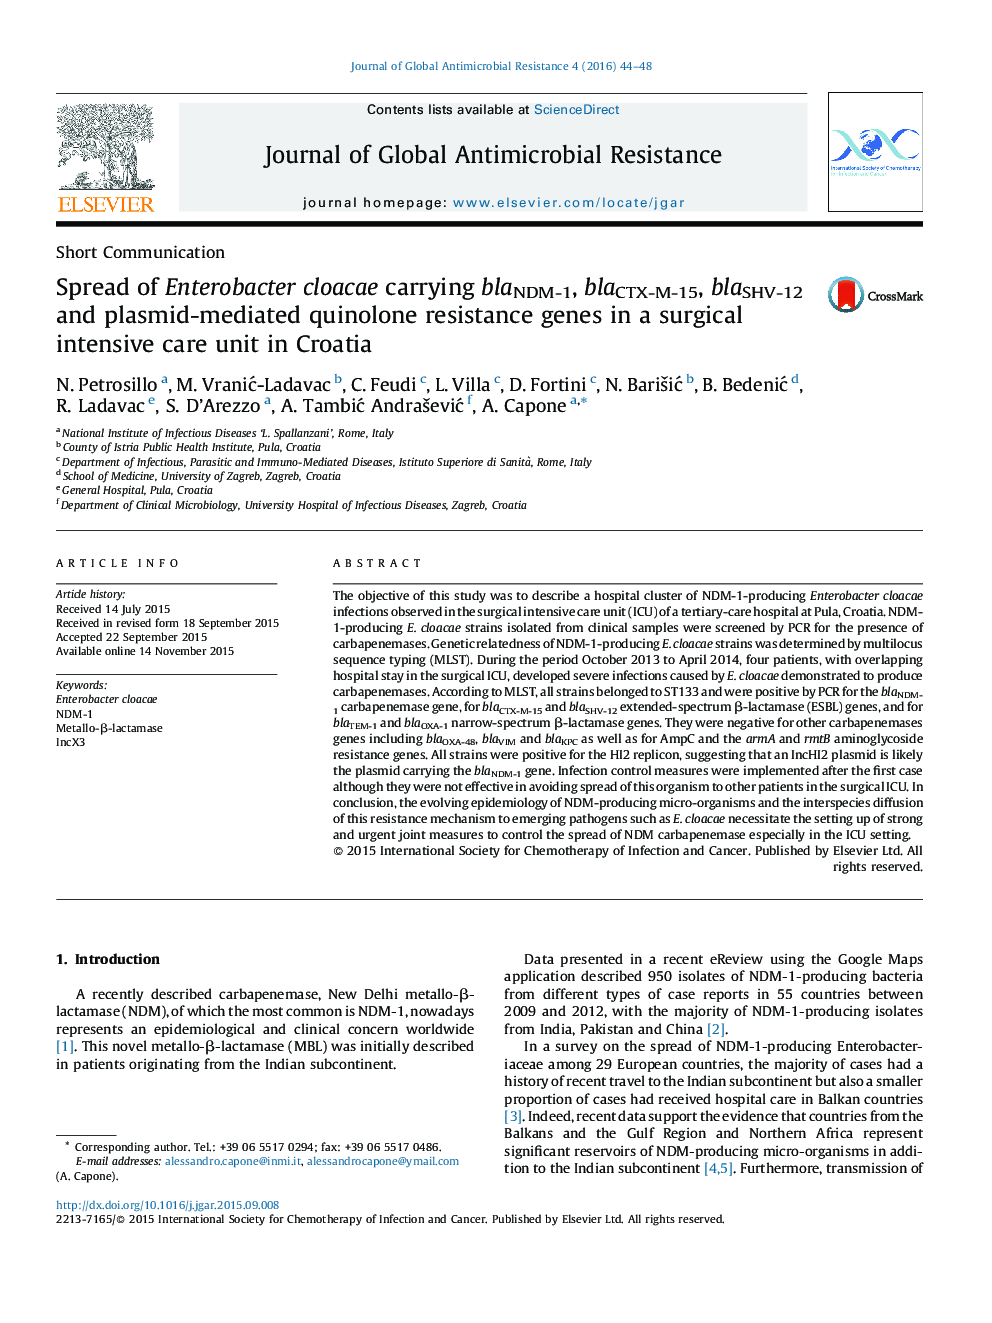 Spread of Enterobacter cloacae carrying blaNDM-1, blaCTX-M-15, blaSHV-12 and plasmid-mediated quinolone resistance genes in a surgical intensive care unit in Croatia